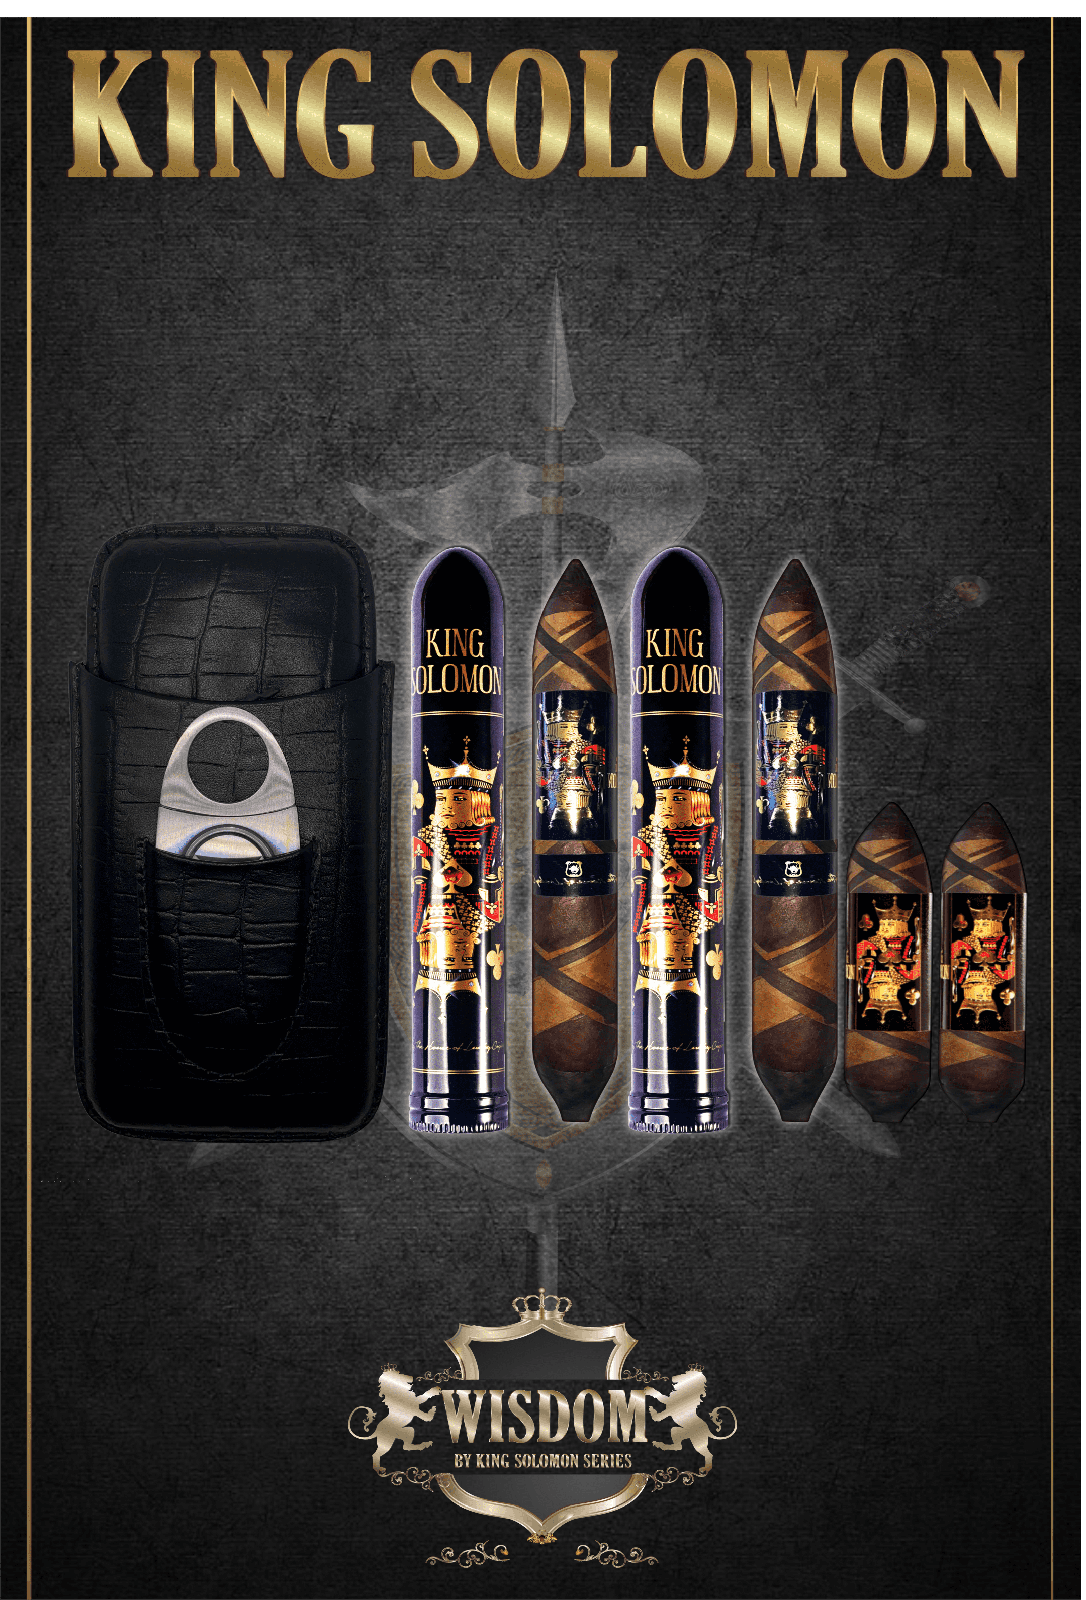 Wisdom 4x60 Cigar From The King Solomon Series: Set of 2 and 2 King Solomon 7x58 Cigar with Travel Humidor, Cutter